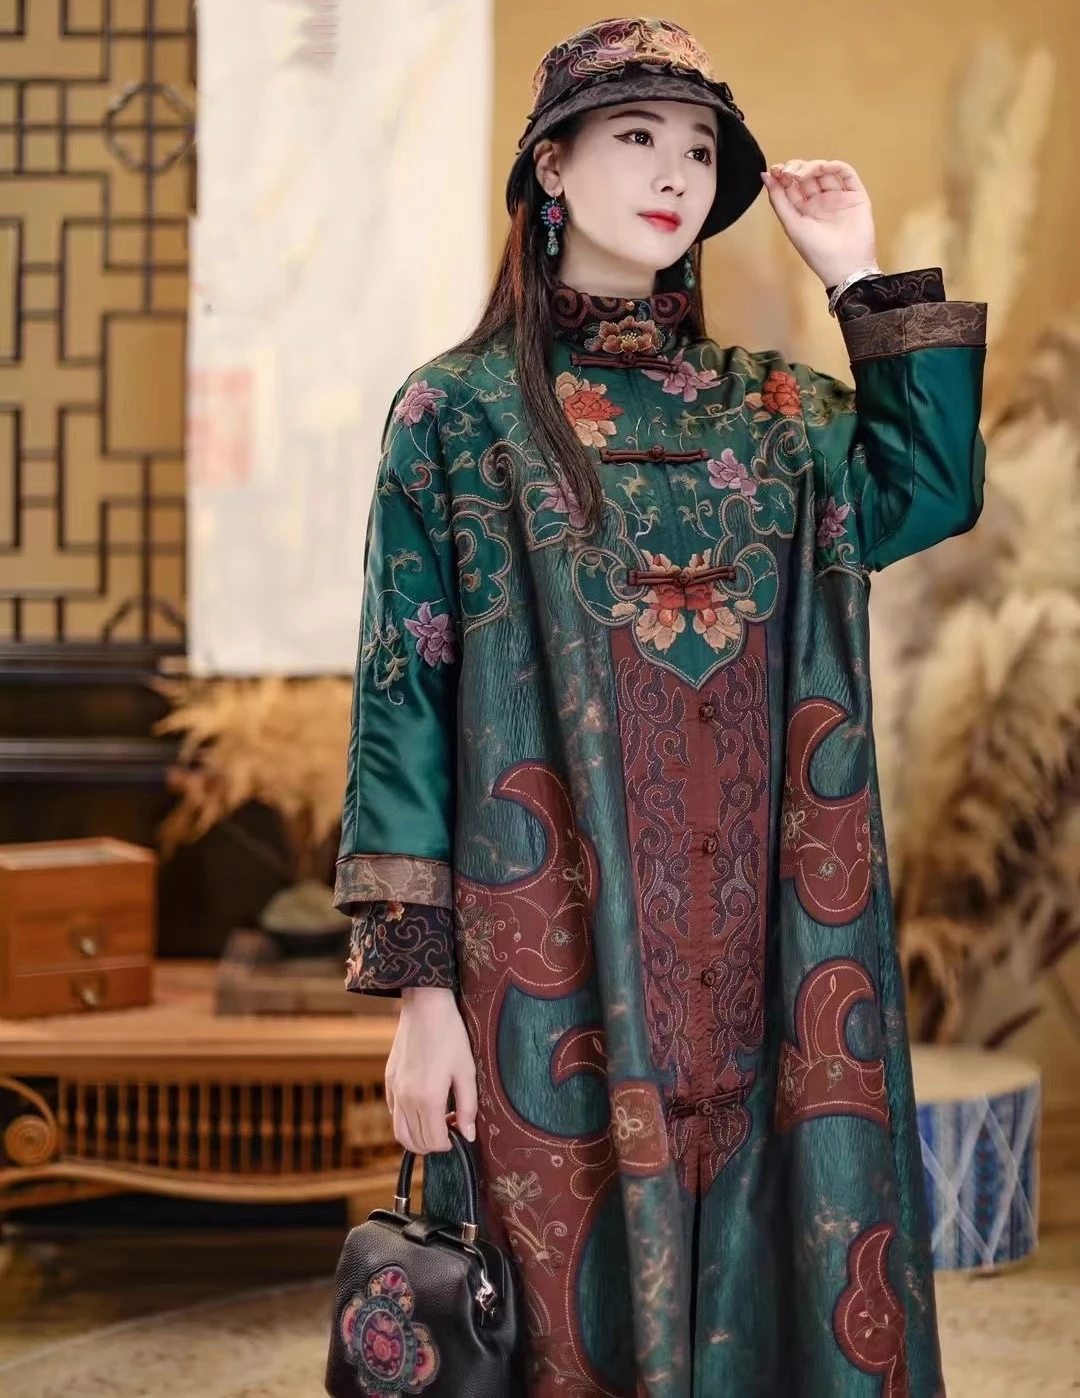 

TOP Women's coat Vintage Green embroidery long Trench coat National style loose Large size Luxury coat Autumn outerwear